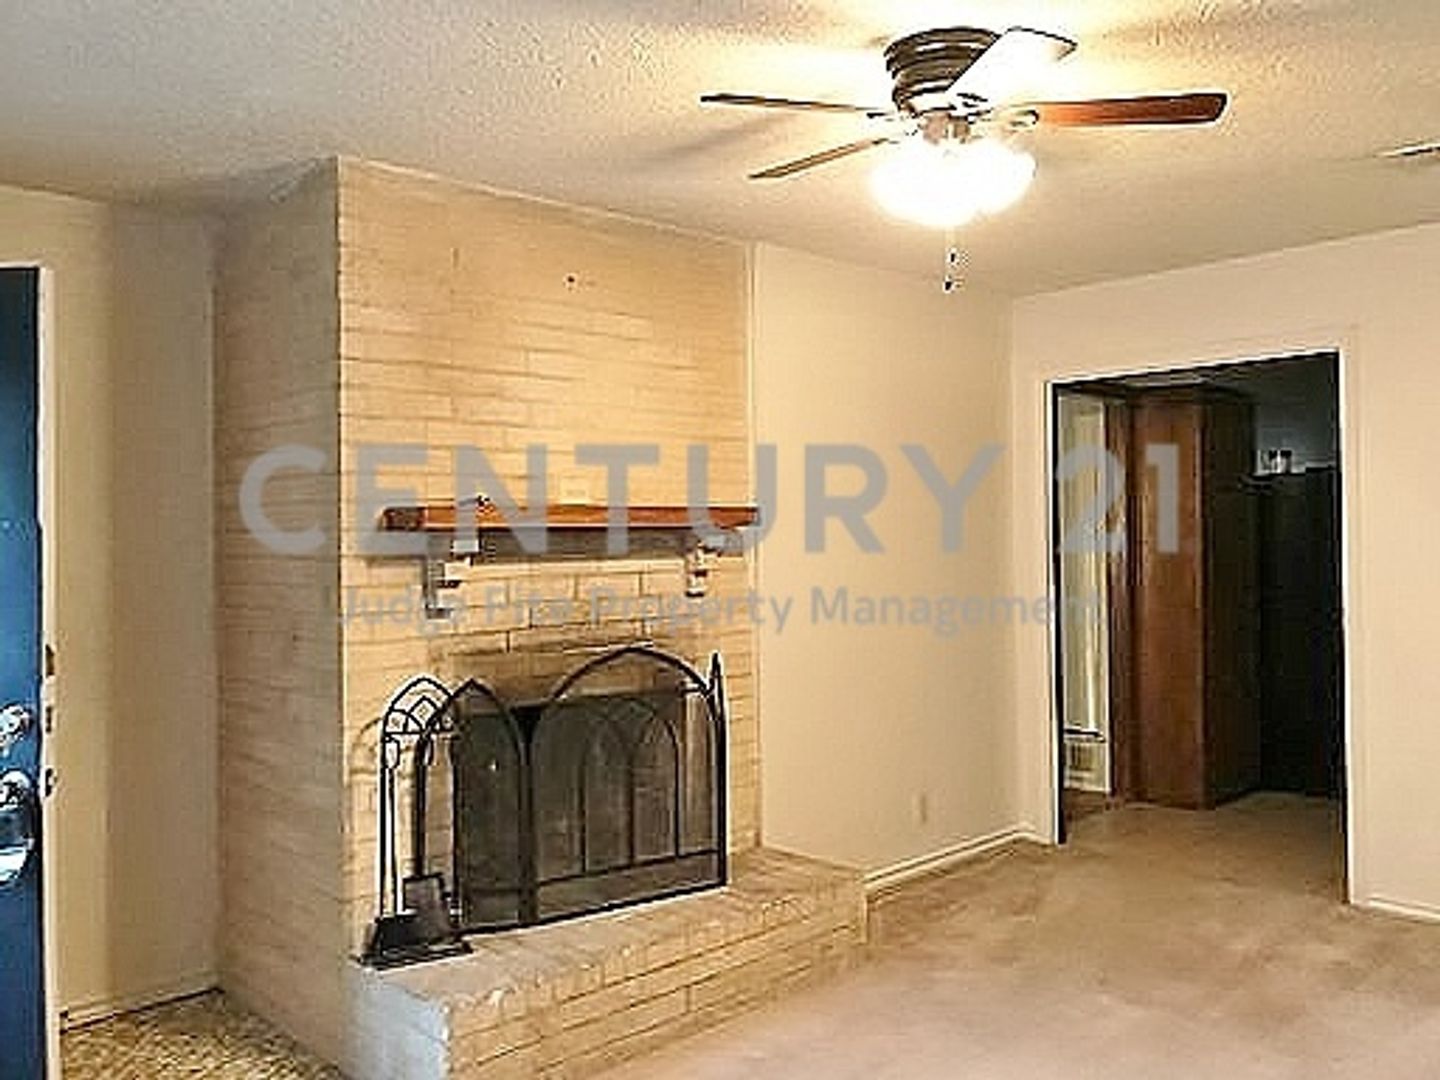 Great 2/1 Duplex Situated on Cul-de-sac in Denton For Rent!